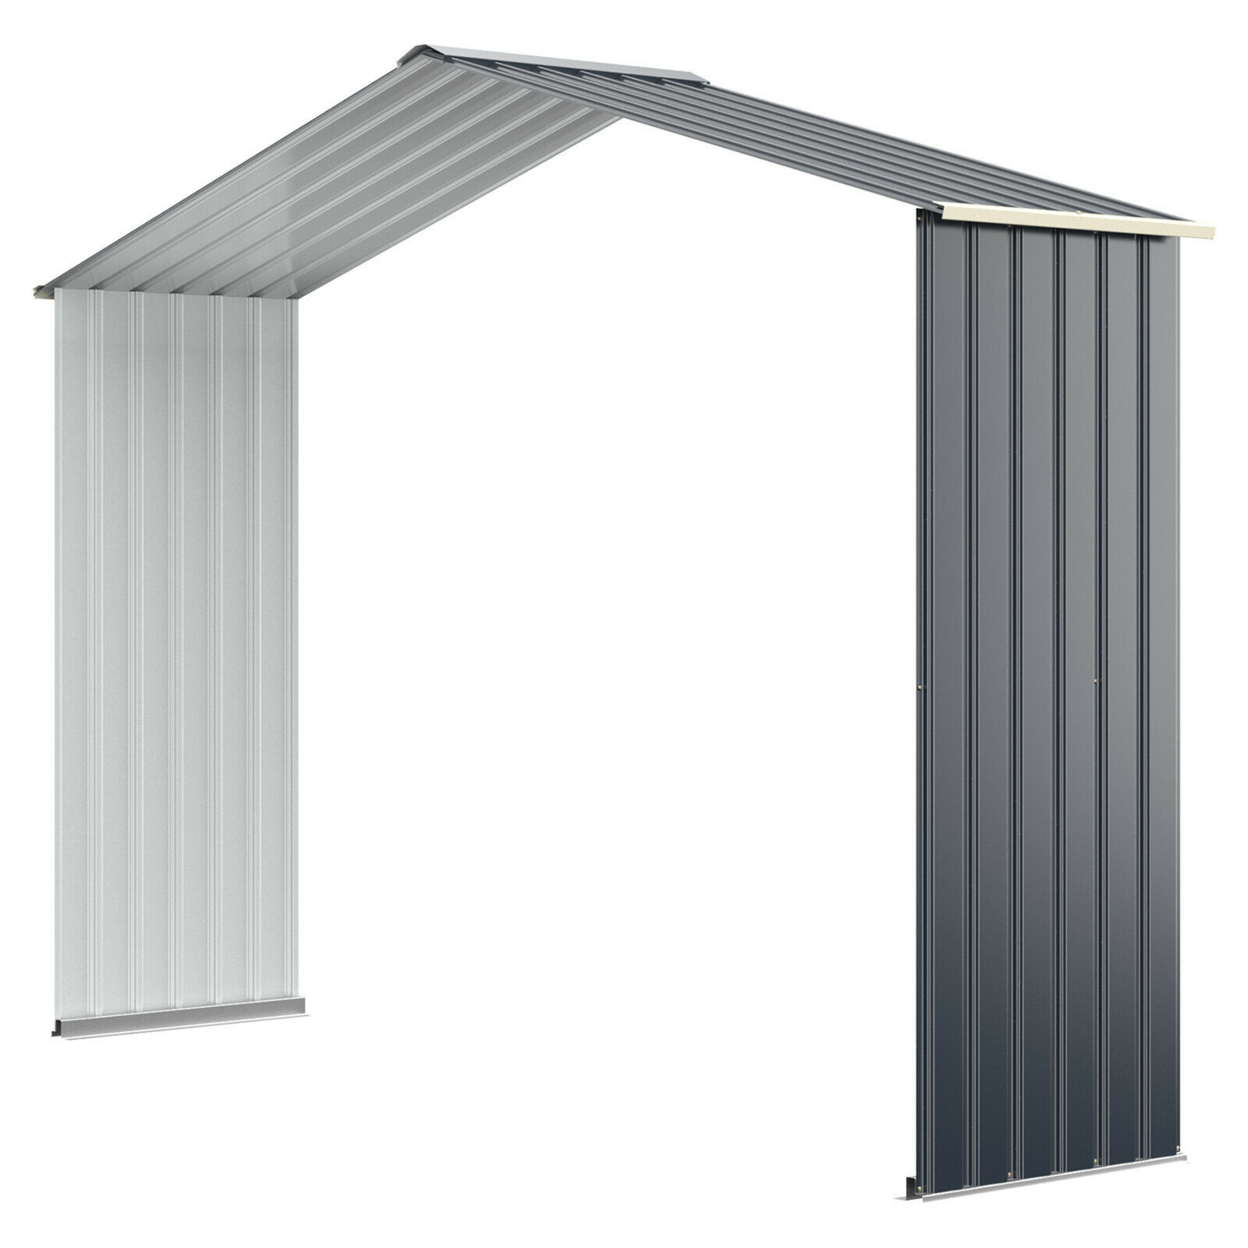 Outdoor Storage Shed Extension Kit For 7/9.1/11.2 Ft Shed Width Grey - Grey, For 11.2 Ft Shed